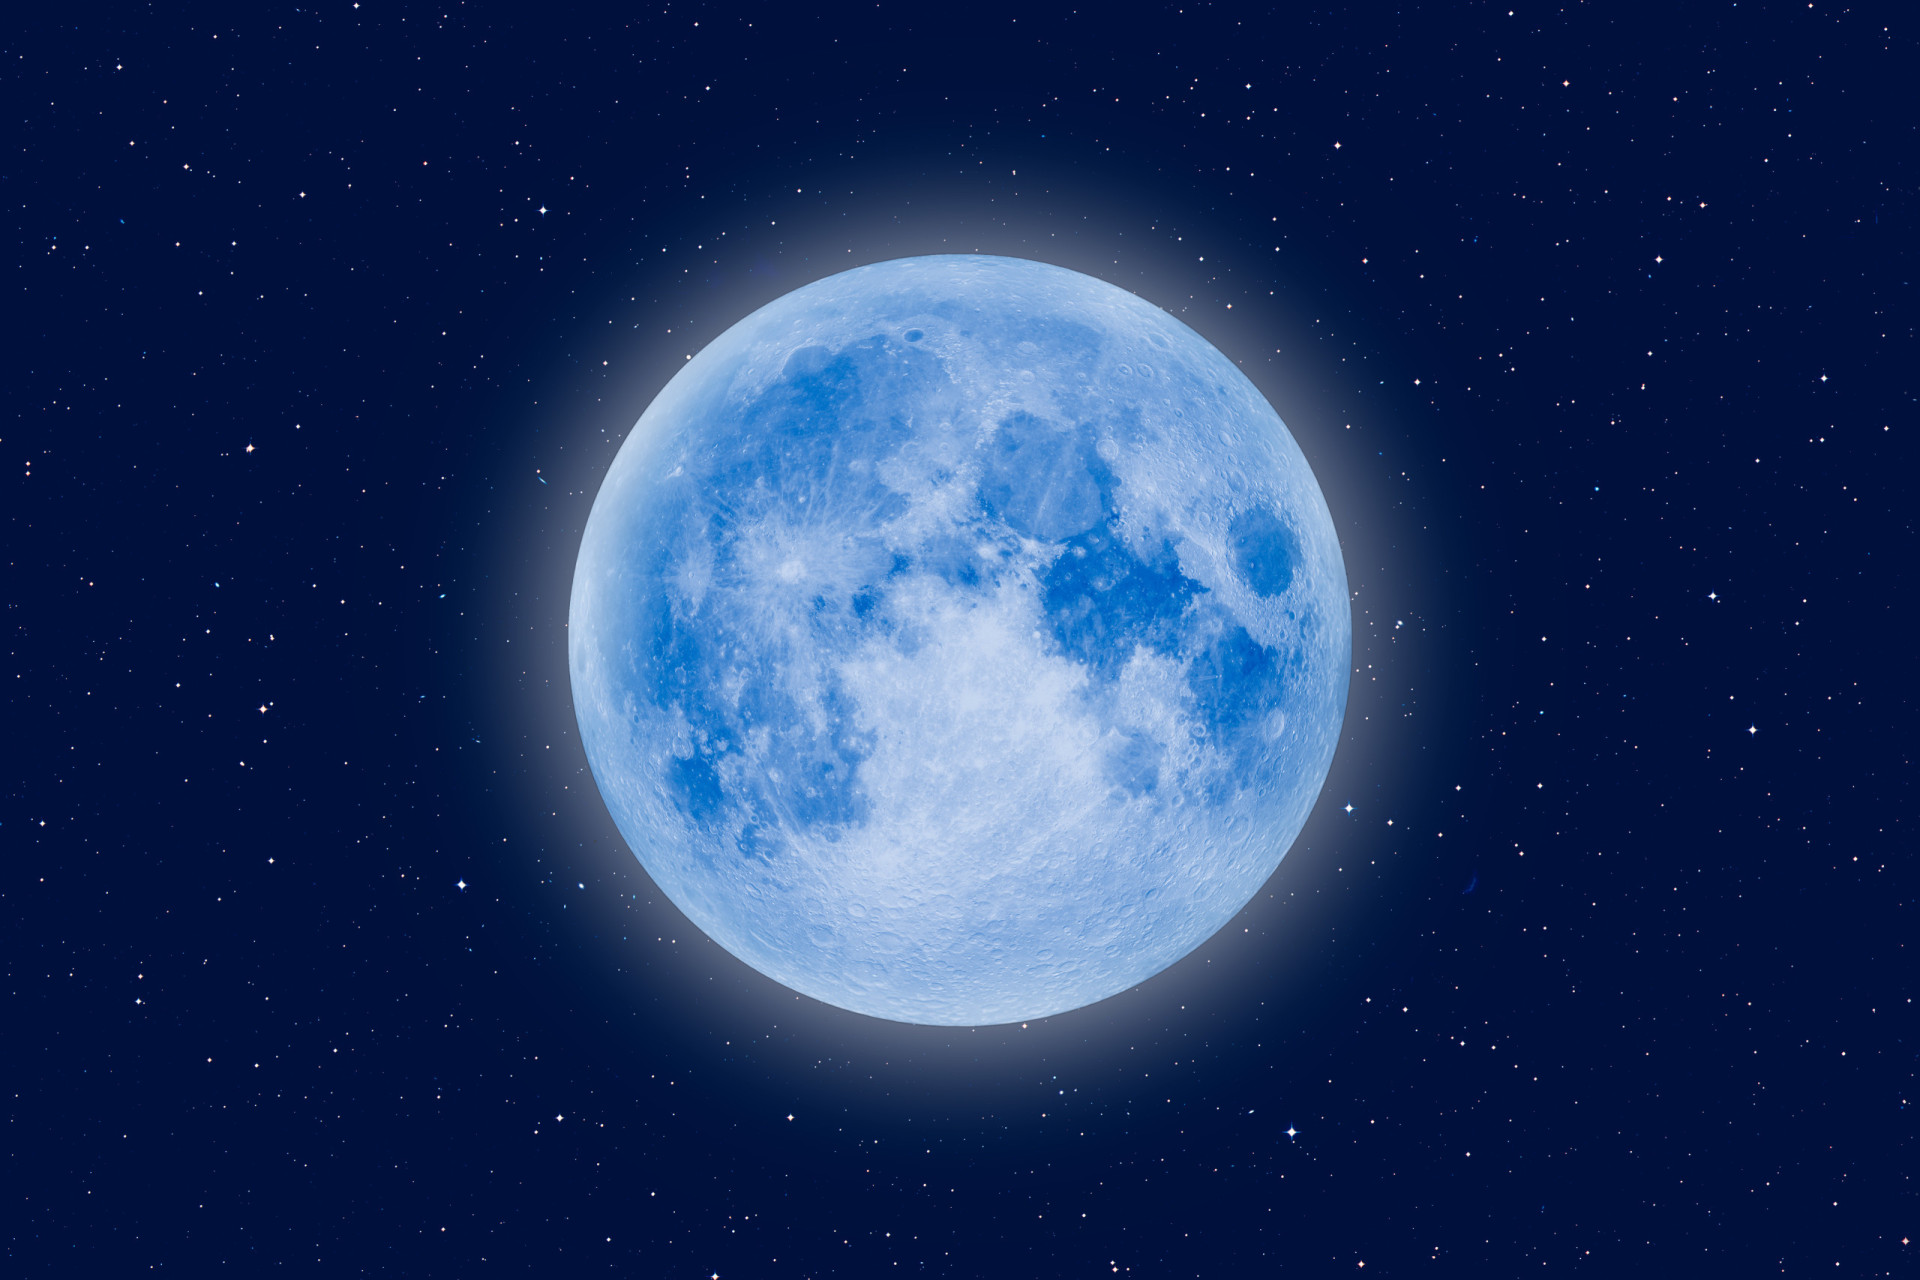 <p>A rare blue moon awaits on July 21, as we experience our second <a href="https://www.starsinsider.com/lifestyle/674090/the-best-full-moon-ritual-according-to-your-star-sign" rel="noopener">full moon</a> in the sign of Capricorn in a row.</p><p><a href="https://www.msn.com/en-ca/community/channel/vid-7xx8mnucu55yw63we9va2gwr7uihbxwc68fxqp25x6tg4ftibpra?cvid=94631541bc0f4f89bfd59158d696ad7e">Follow us and access great exclusive content every day</a></p>